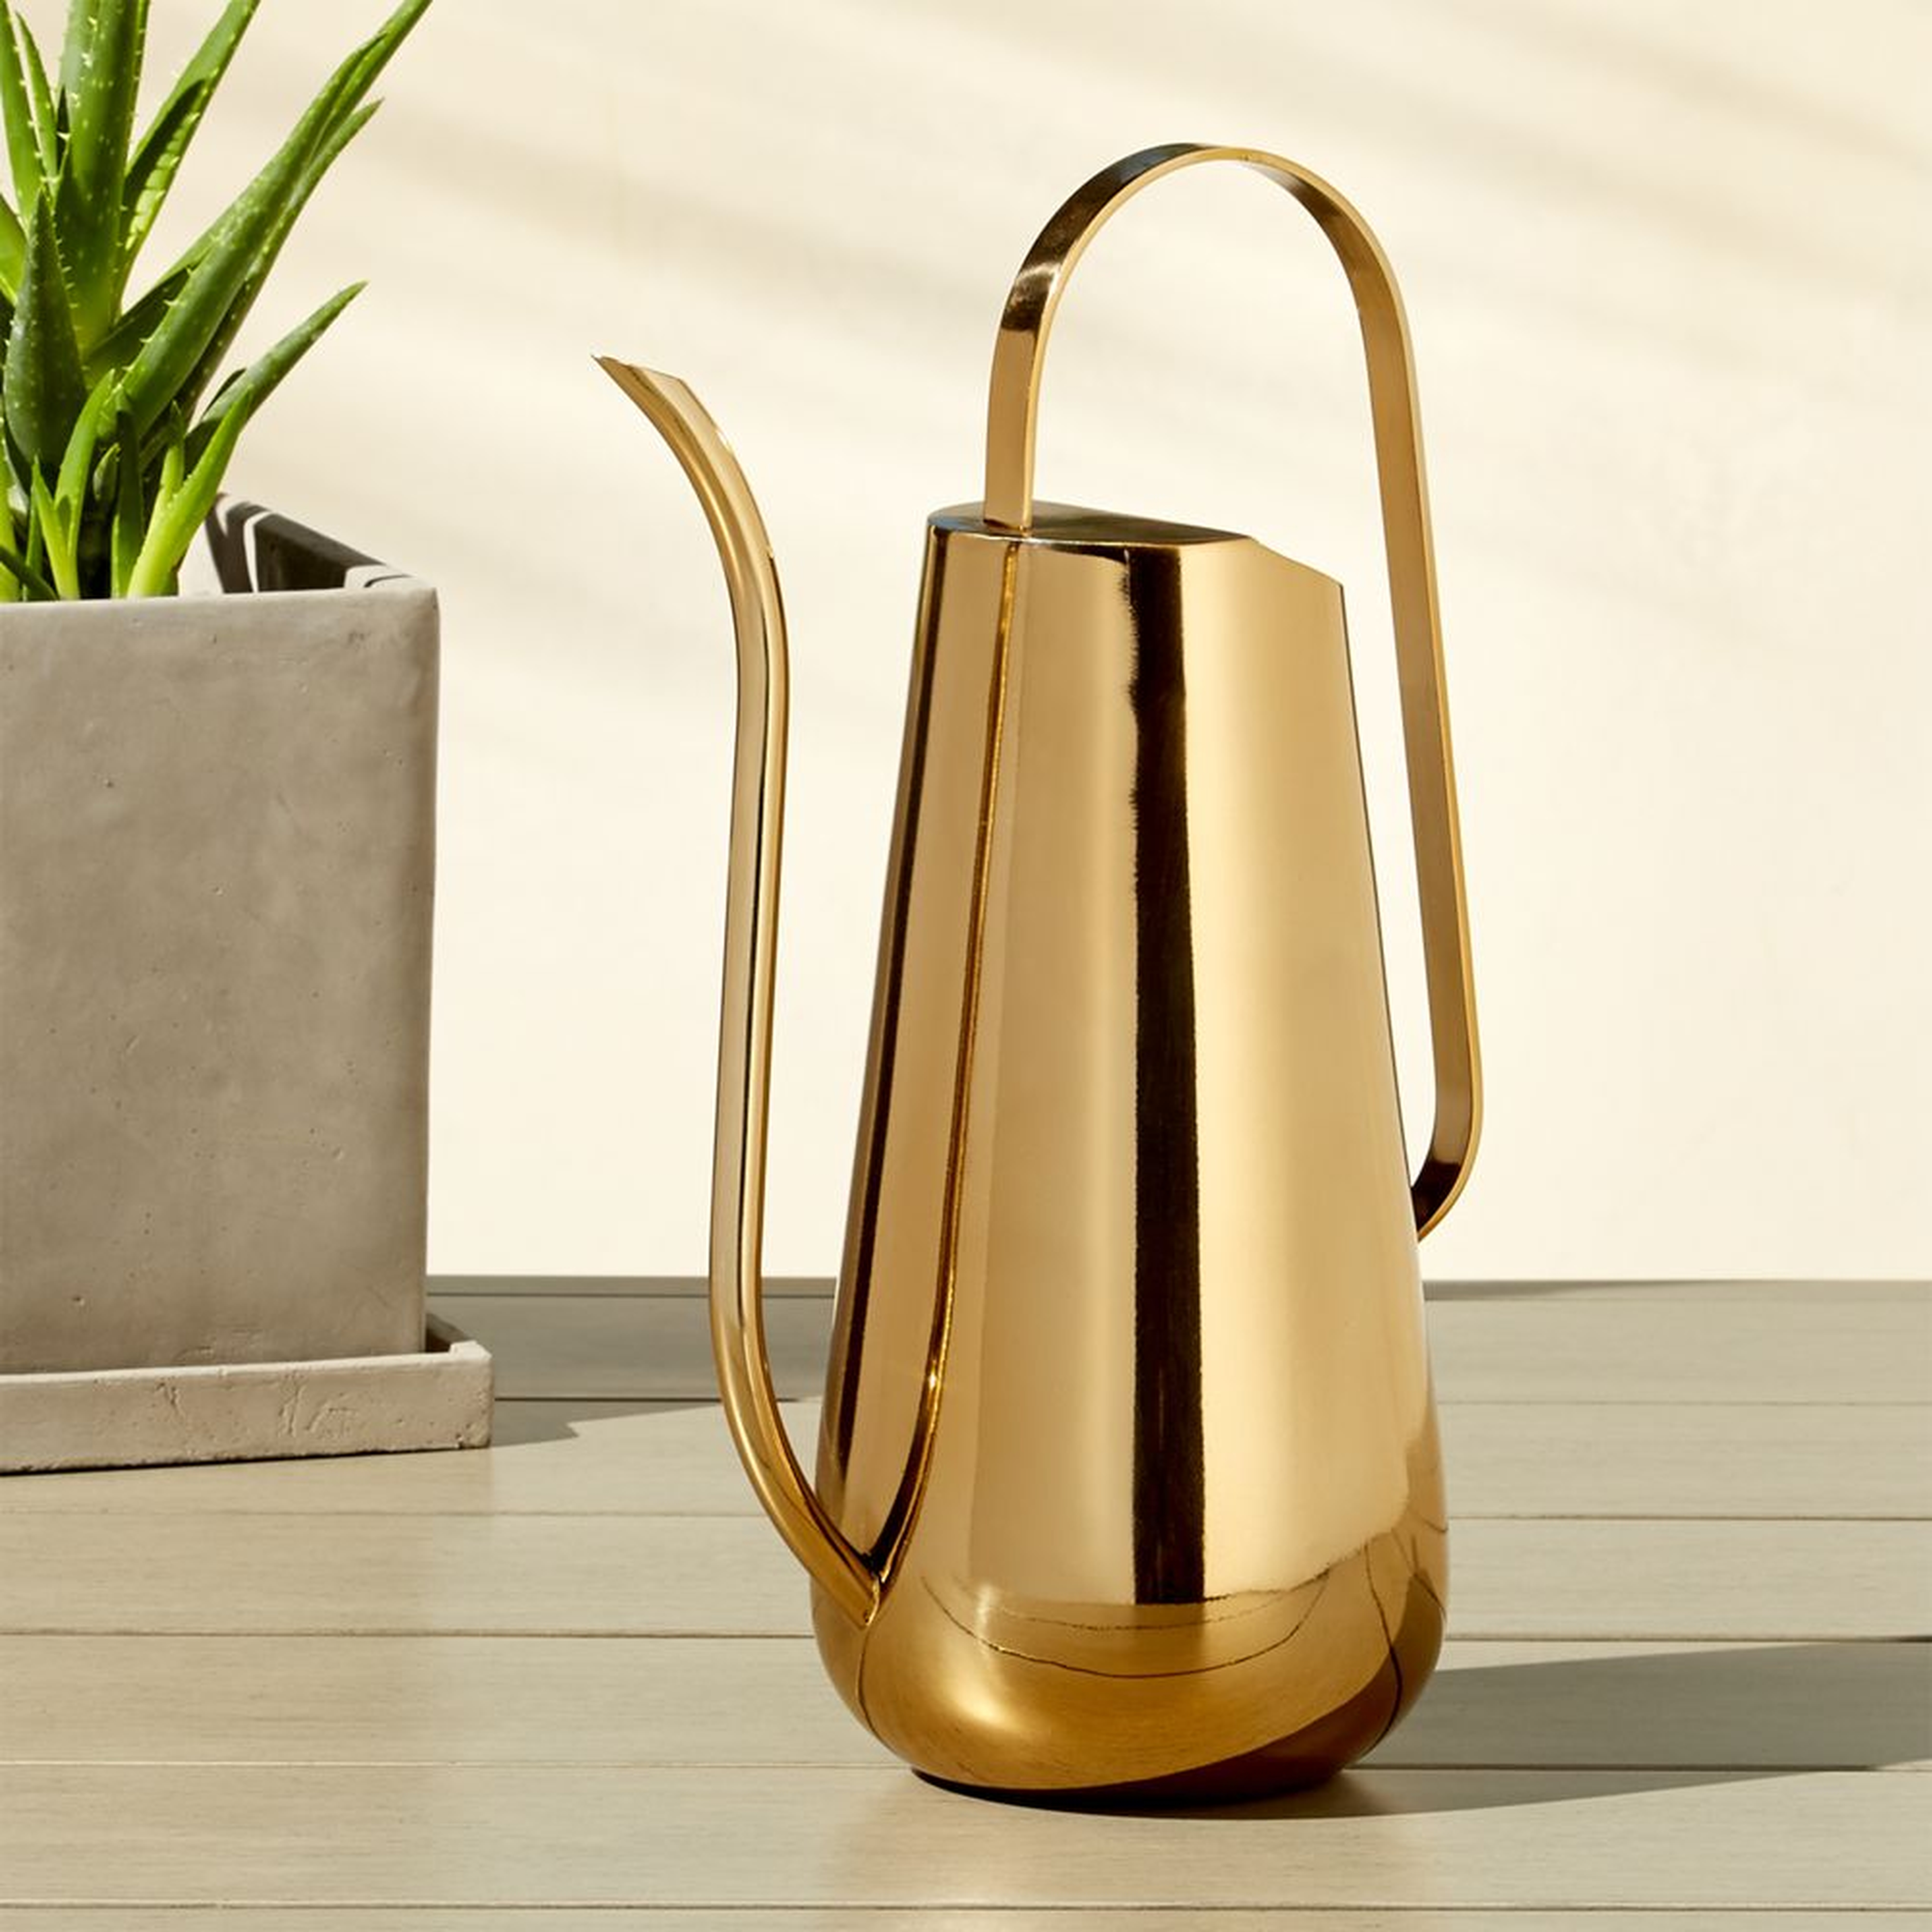 Brass-Plated Watering Can - CB2